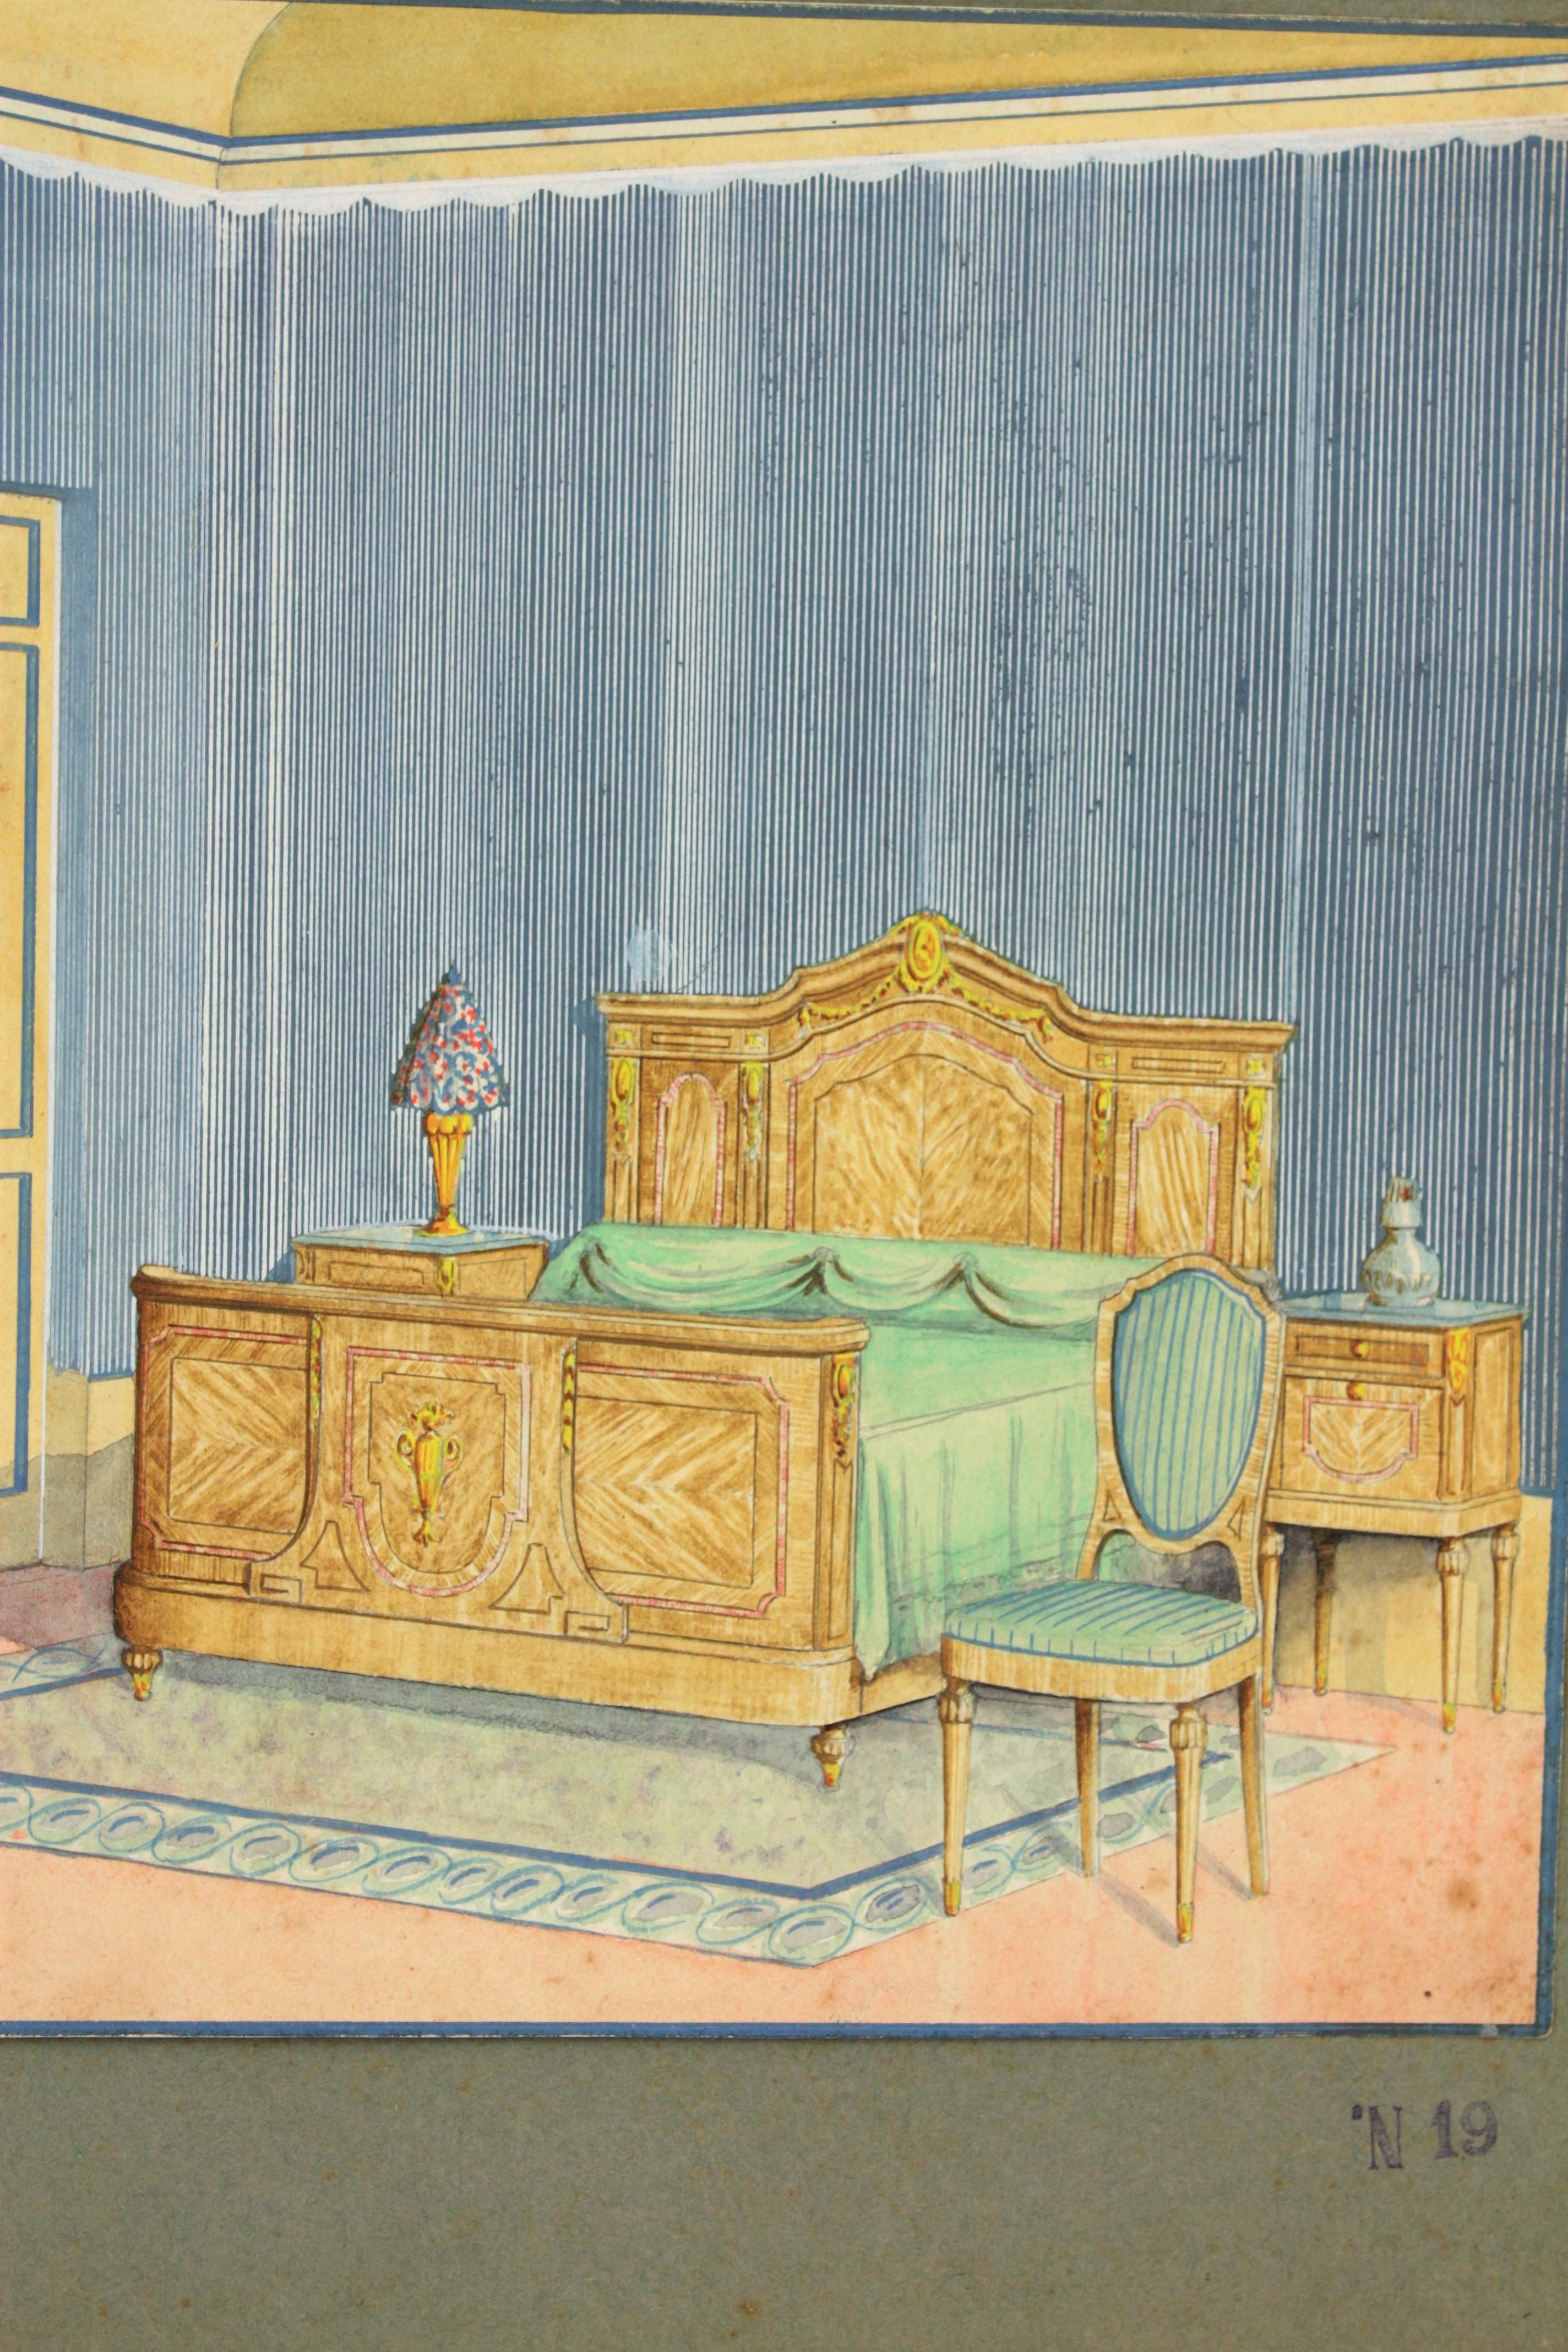 Spanish classical bedroom indoor home scene. Original watercolor, ink and gouache drawing on vellum paper, Project for a home decoration. Cabinet maker archives stamp at the bottom part: 'J. Anguera. Carpintería. Barcelona' Number 19.
Individual